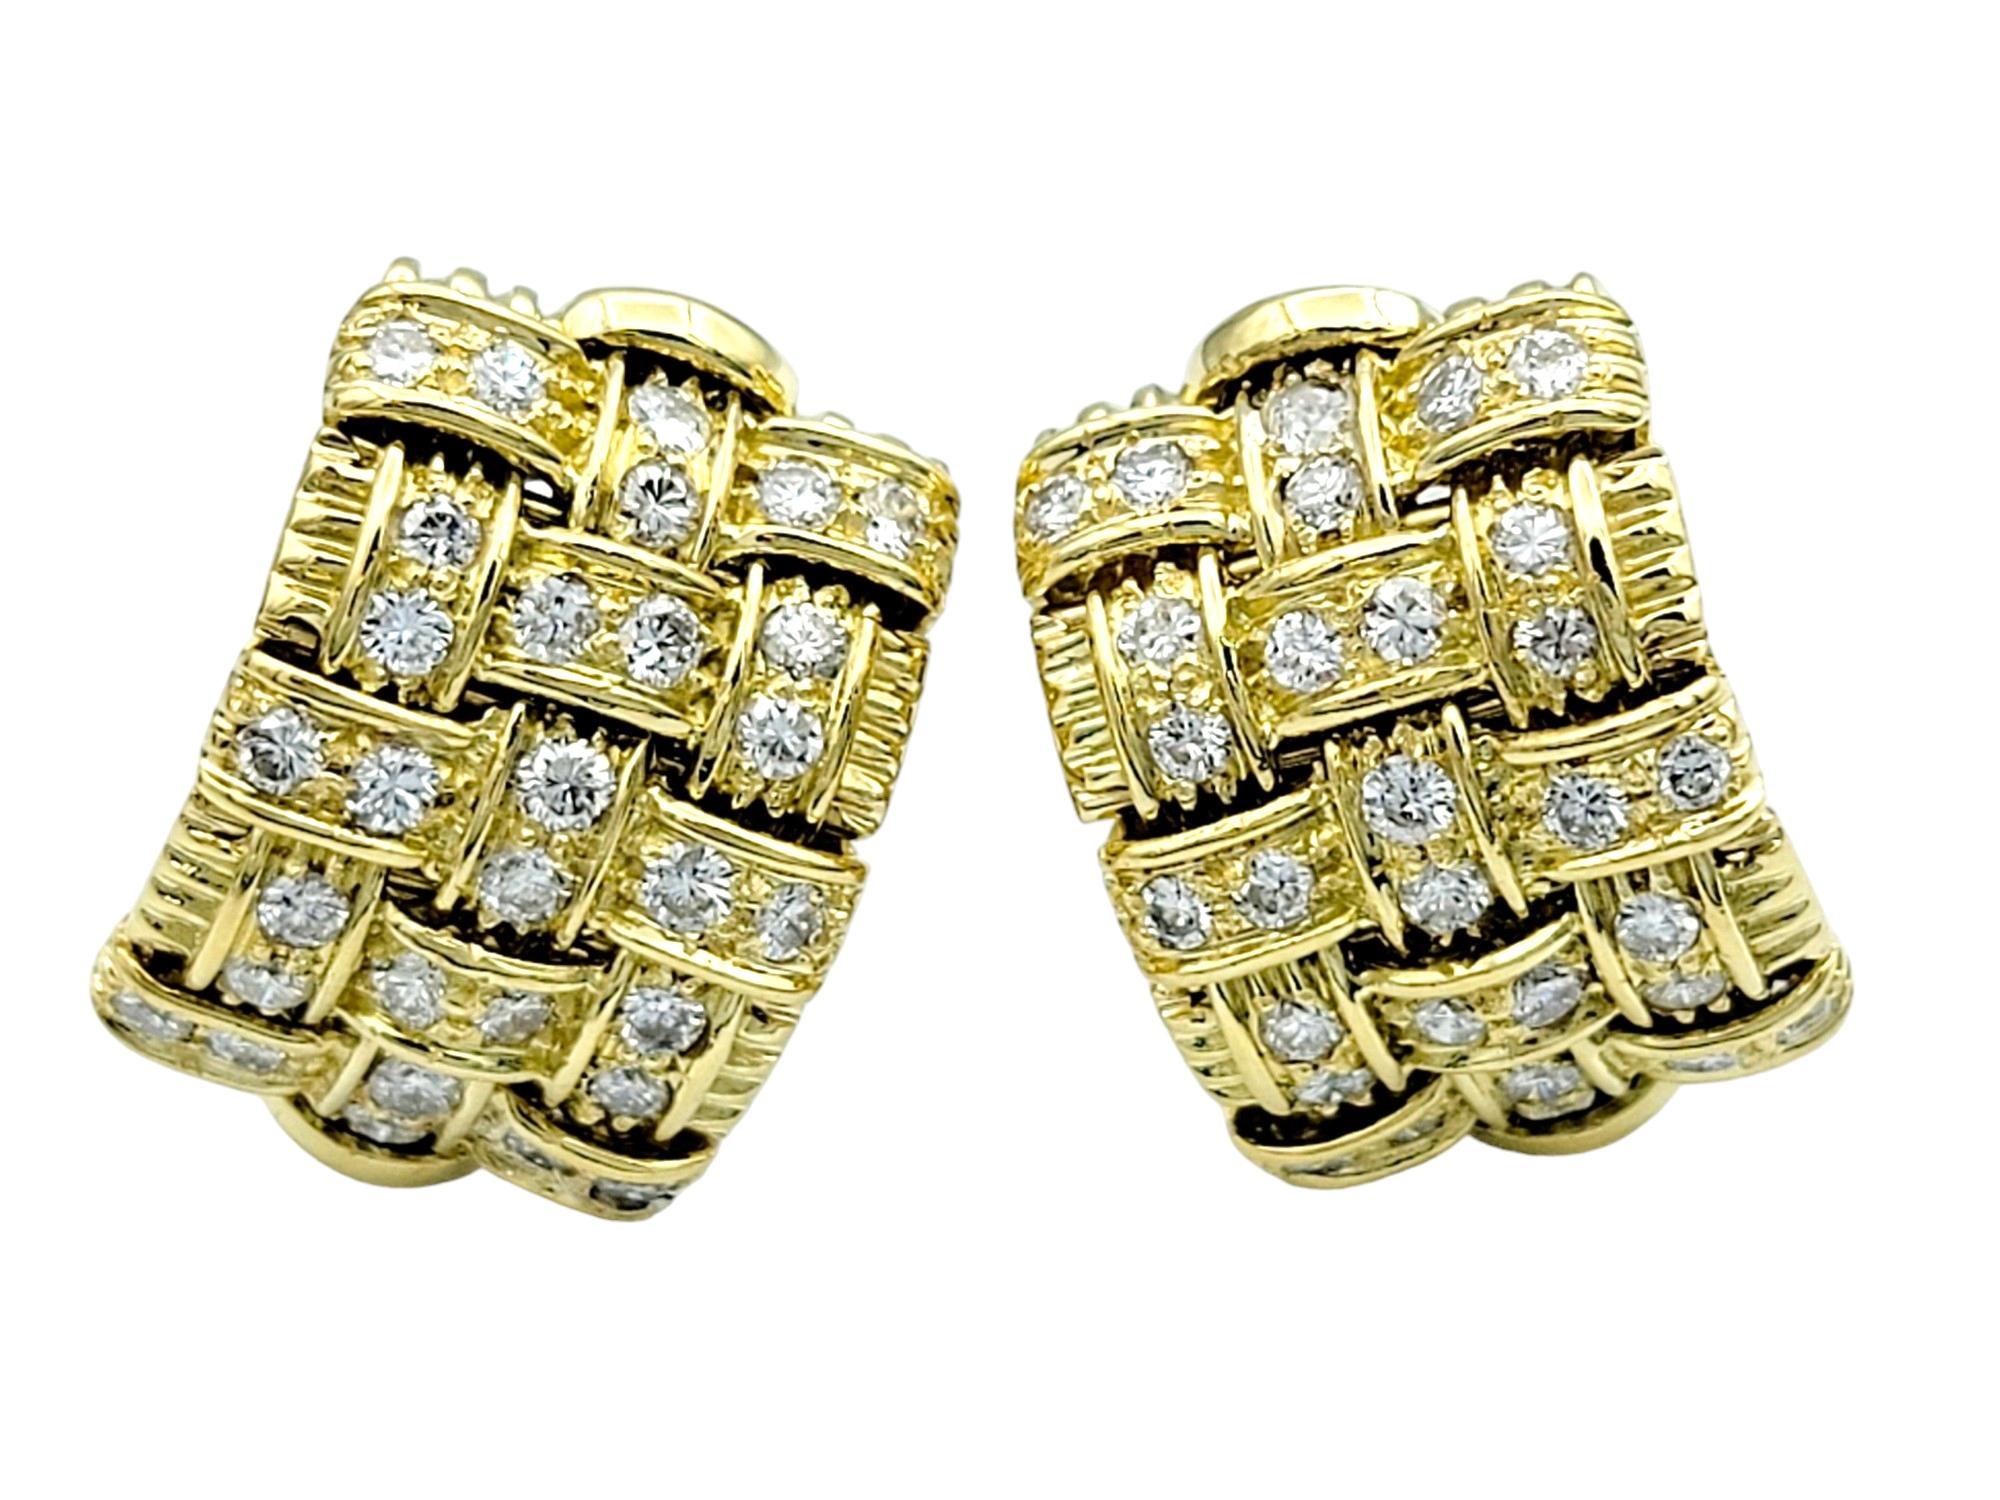 Contemporary Roberto Coin Appassionata Woven Omega Back Earrings with Diamonds 18 Karat Gold For Sale